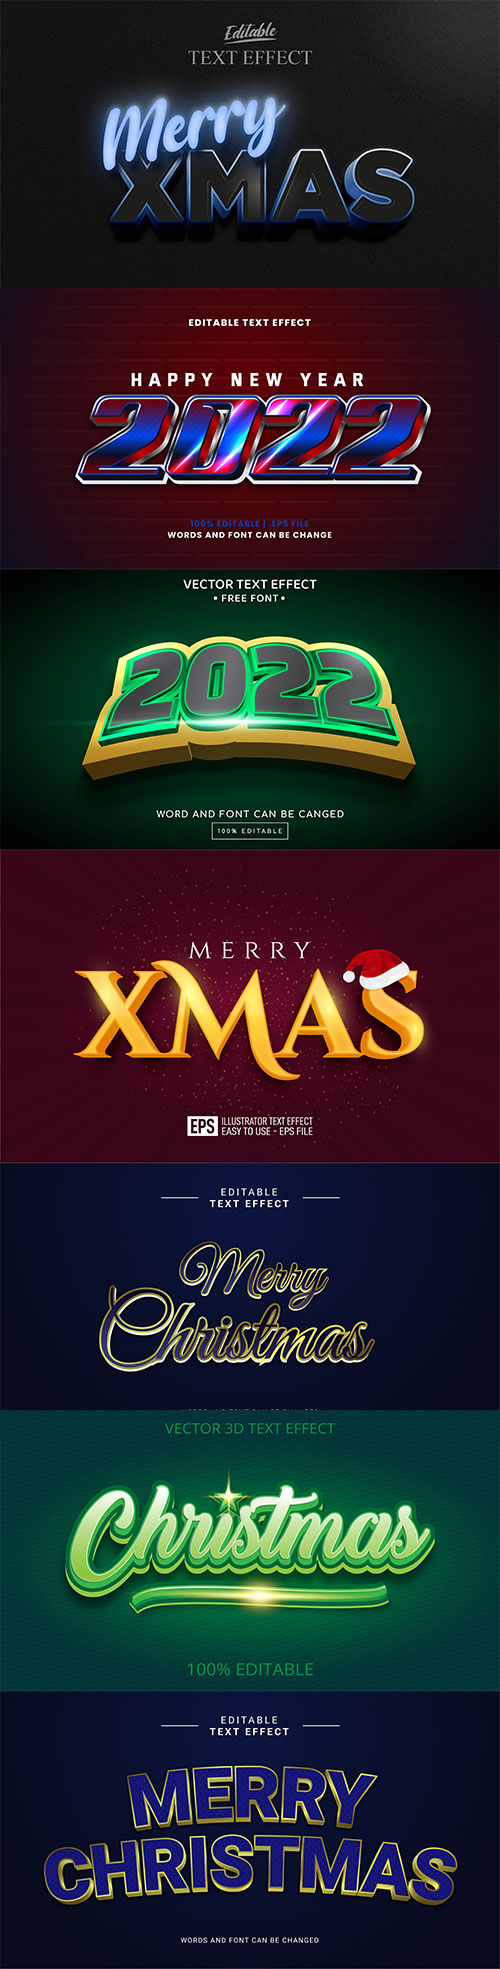 2022 New year and christmas editable text effect vector vol 30